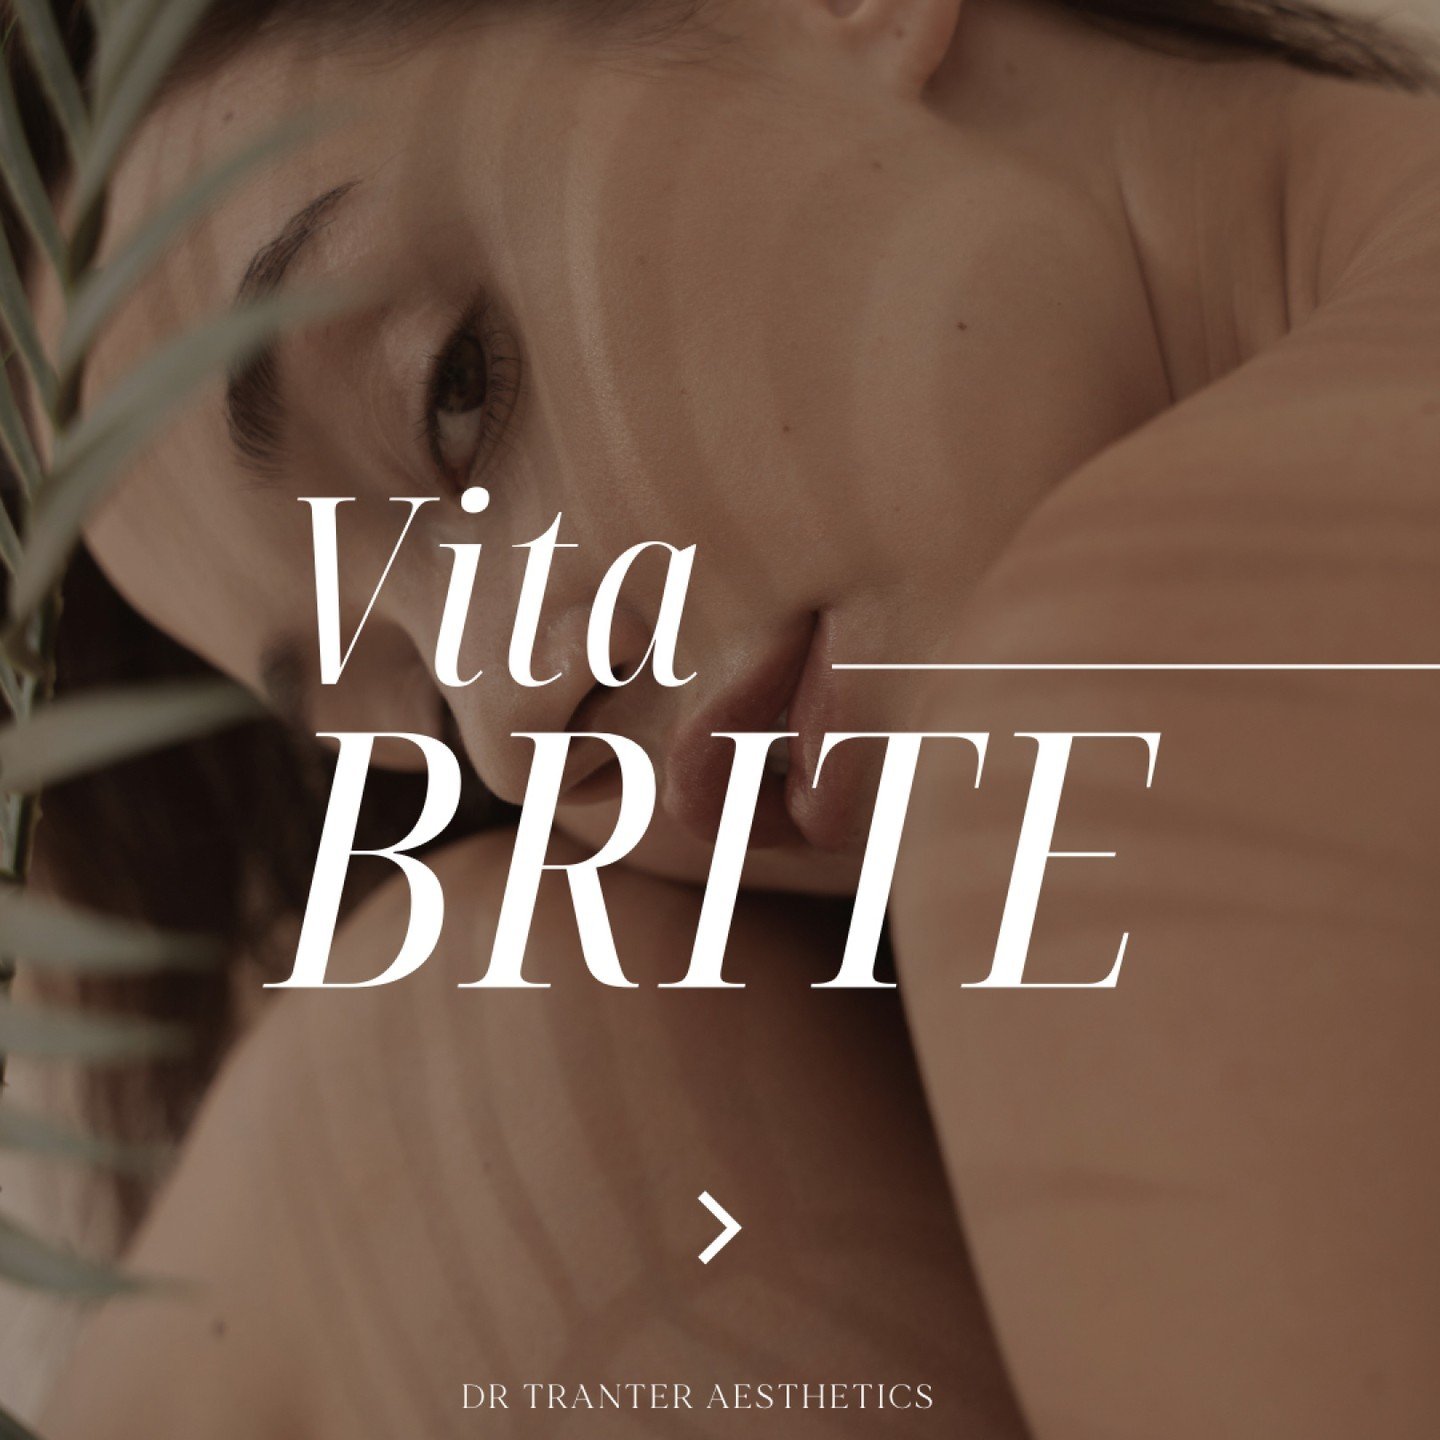 Discover the transformative power of Vita Brite! Designed to be gentle yet effective, Vita Brite is safe for sensitive and rosacea-prone skin. Its refreshing, hydrating, and calming properties provide immediate rejuvenation. Whether you&rsquo;re look